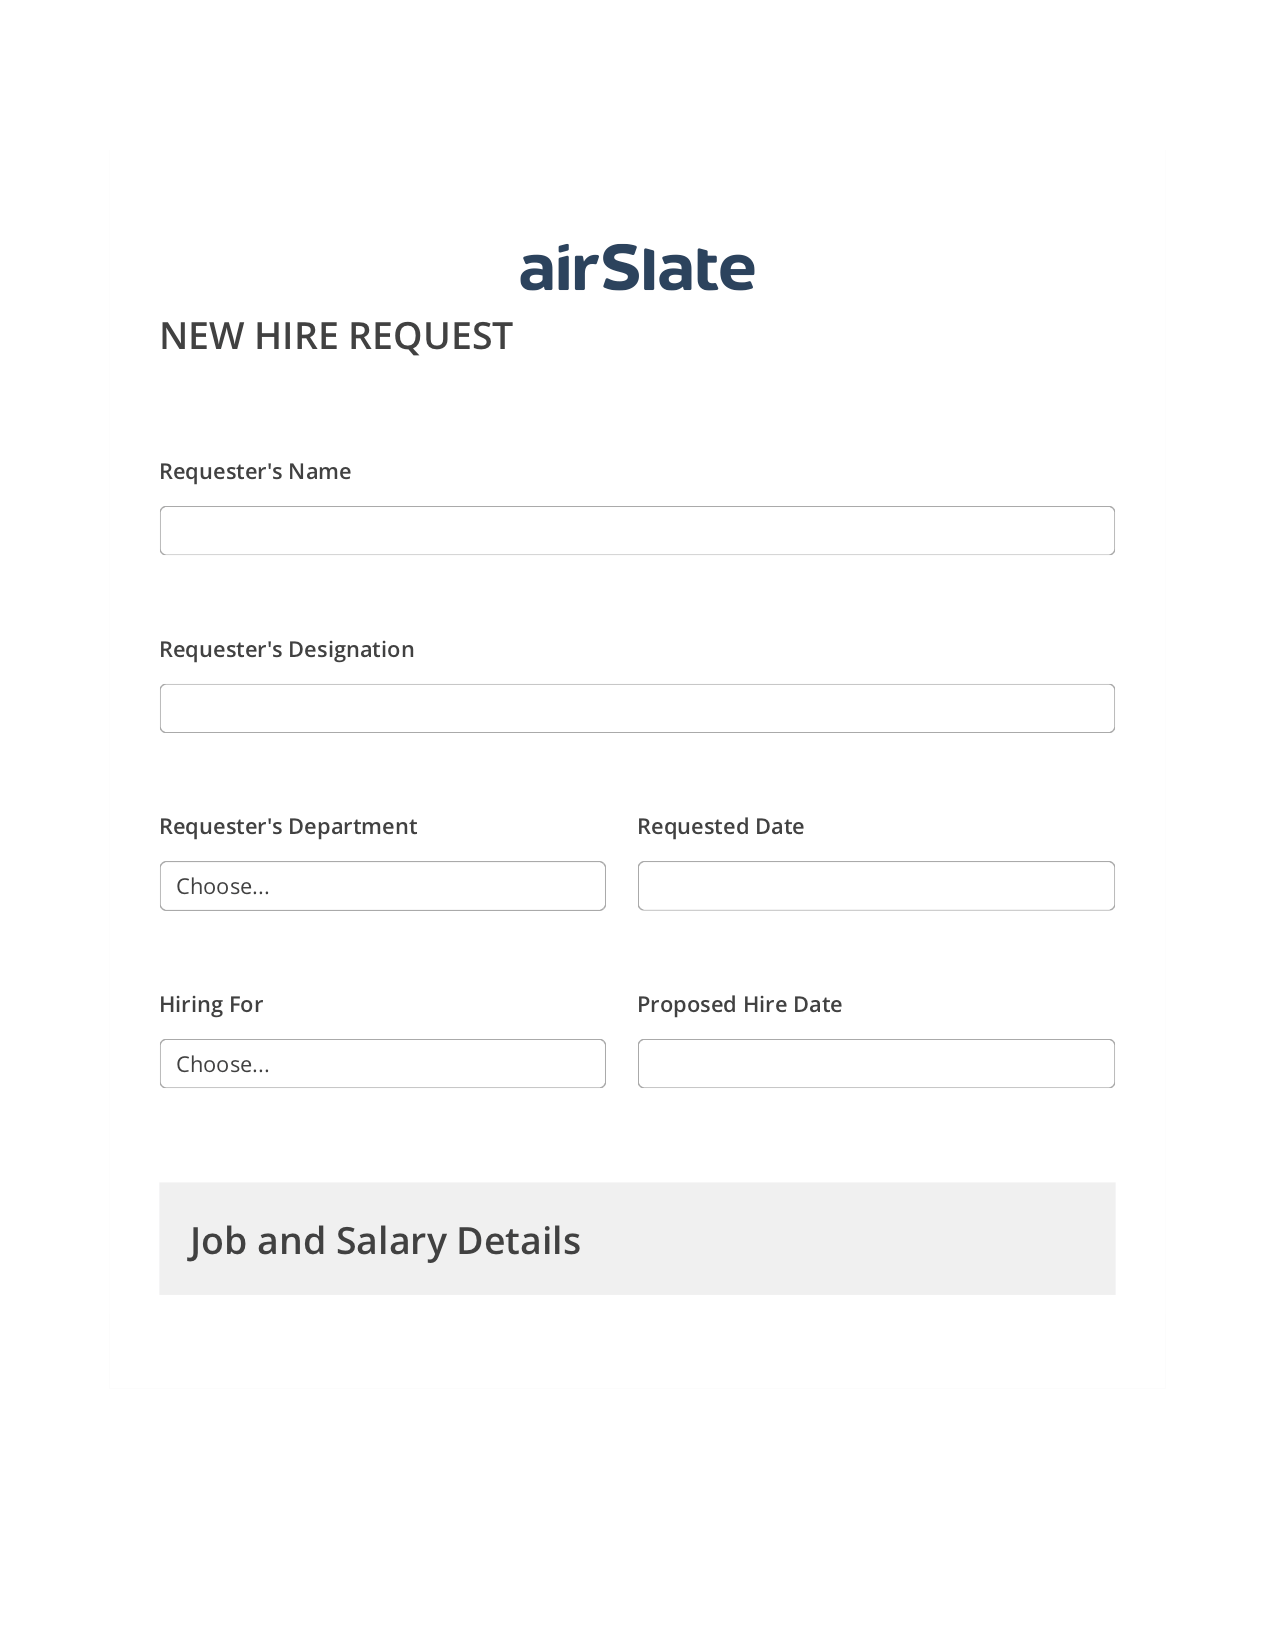 Hiring Request Workflow Prefill from NetSuite records, Unassign Role Bot, Slack Two-Way Binding Bot